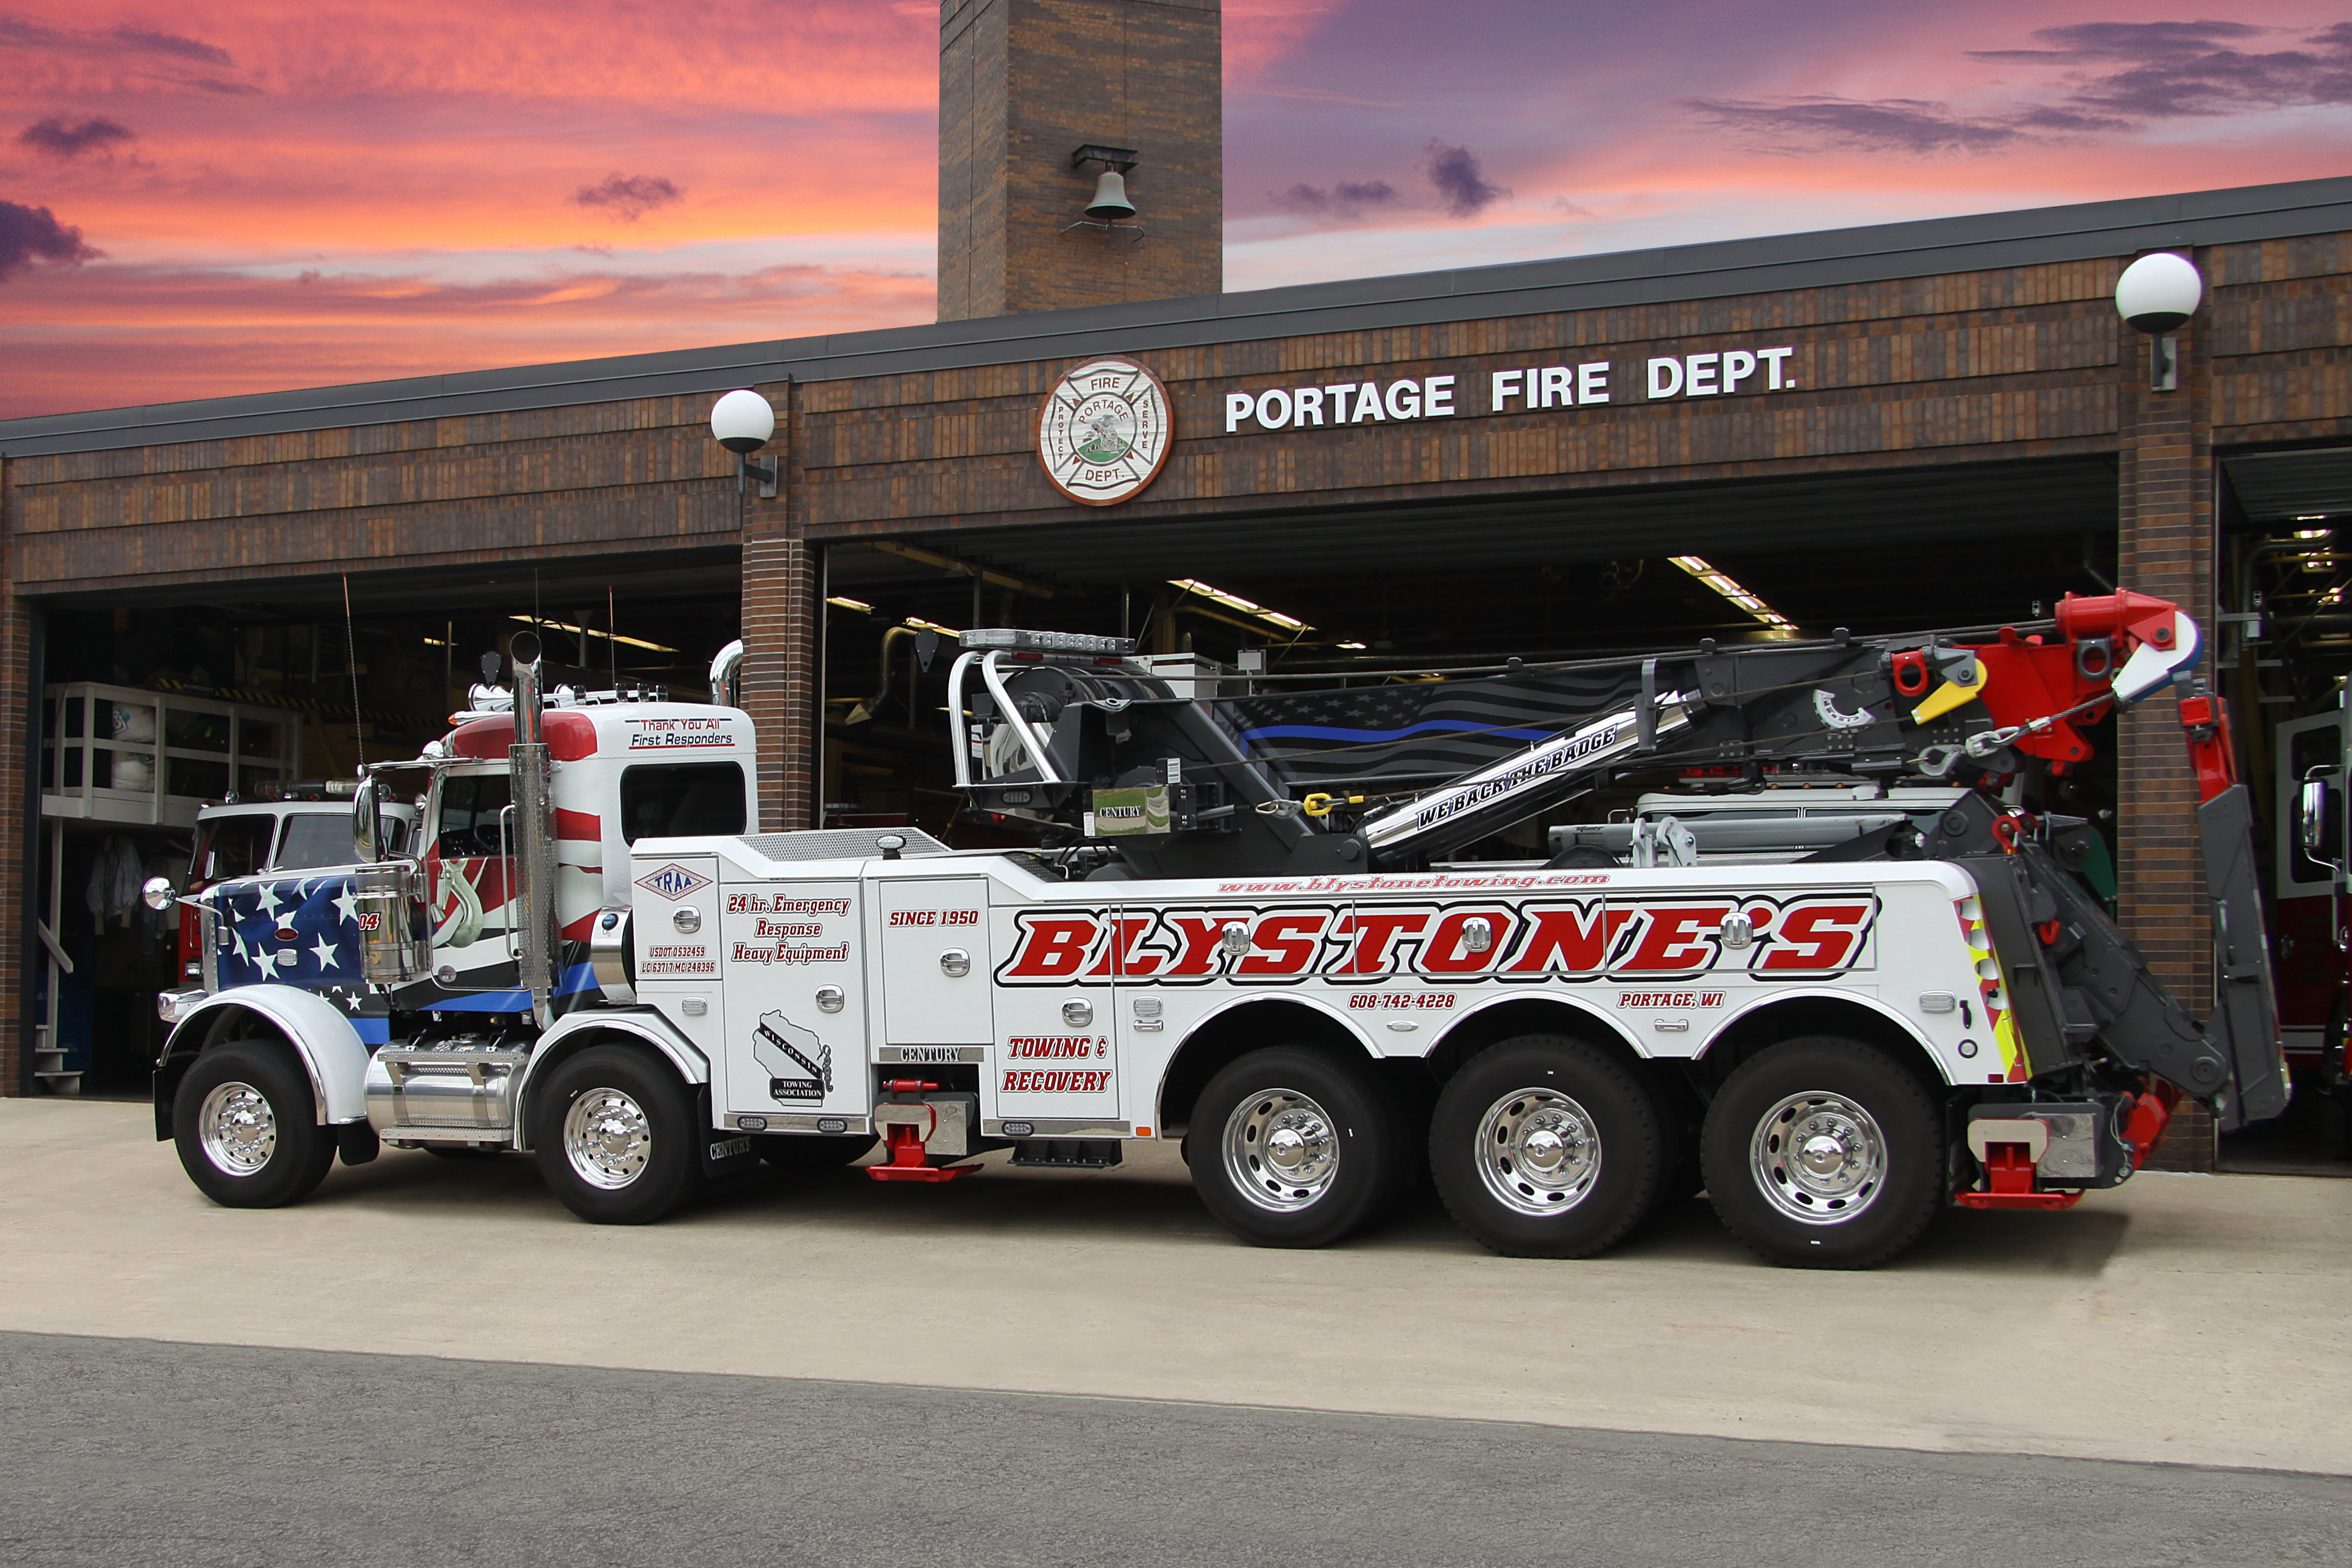 BLYSTONE TOWING AND RECOVERY logo